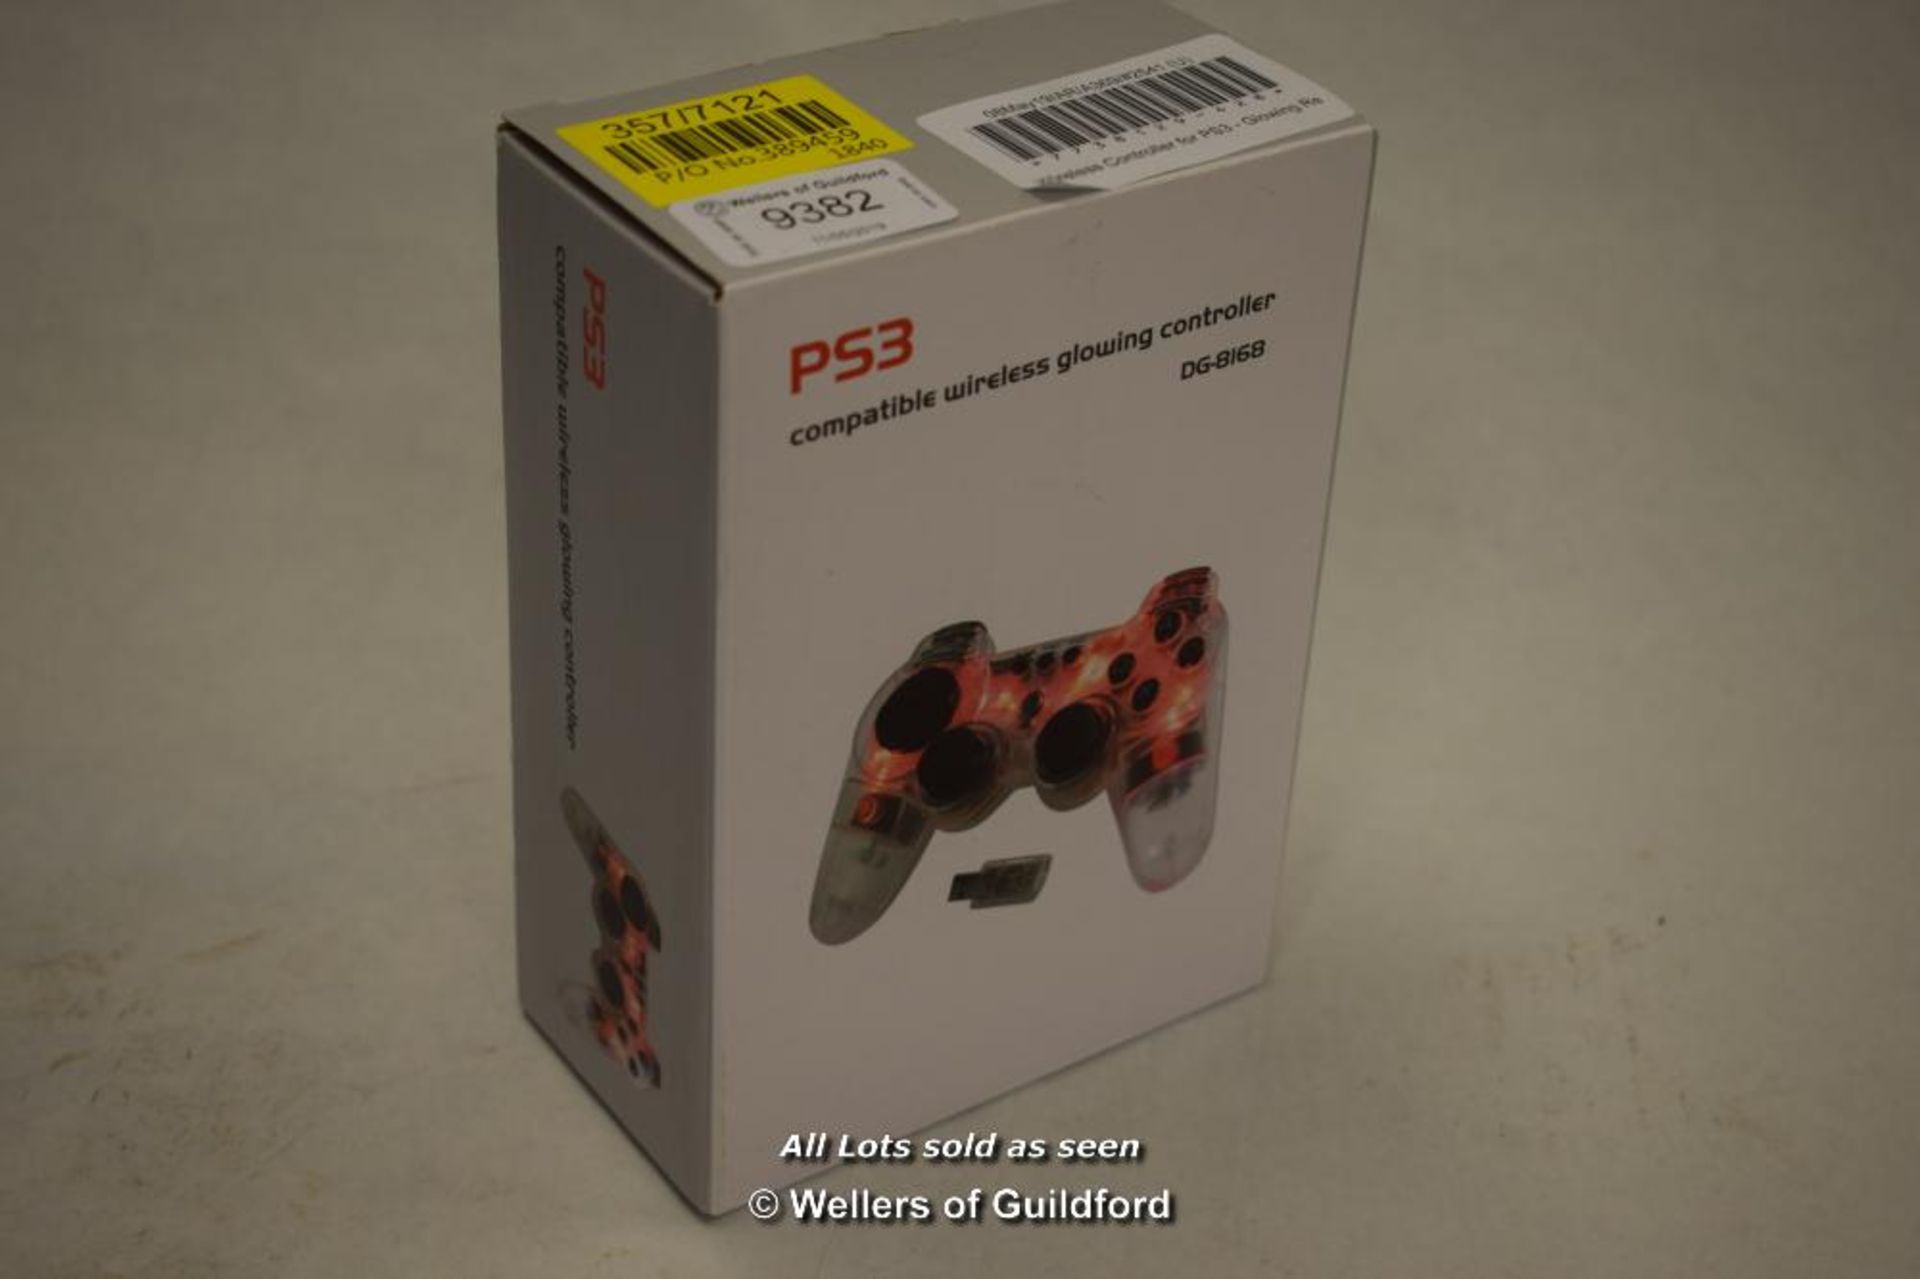 *WIRELESS CONTROLLER FOR PS3 - GLOWING RED [2541]